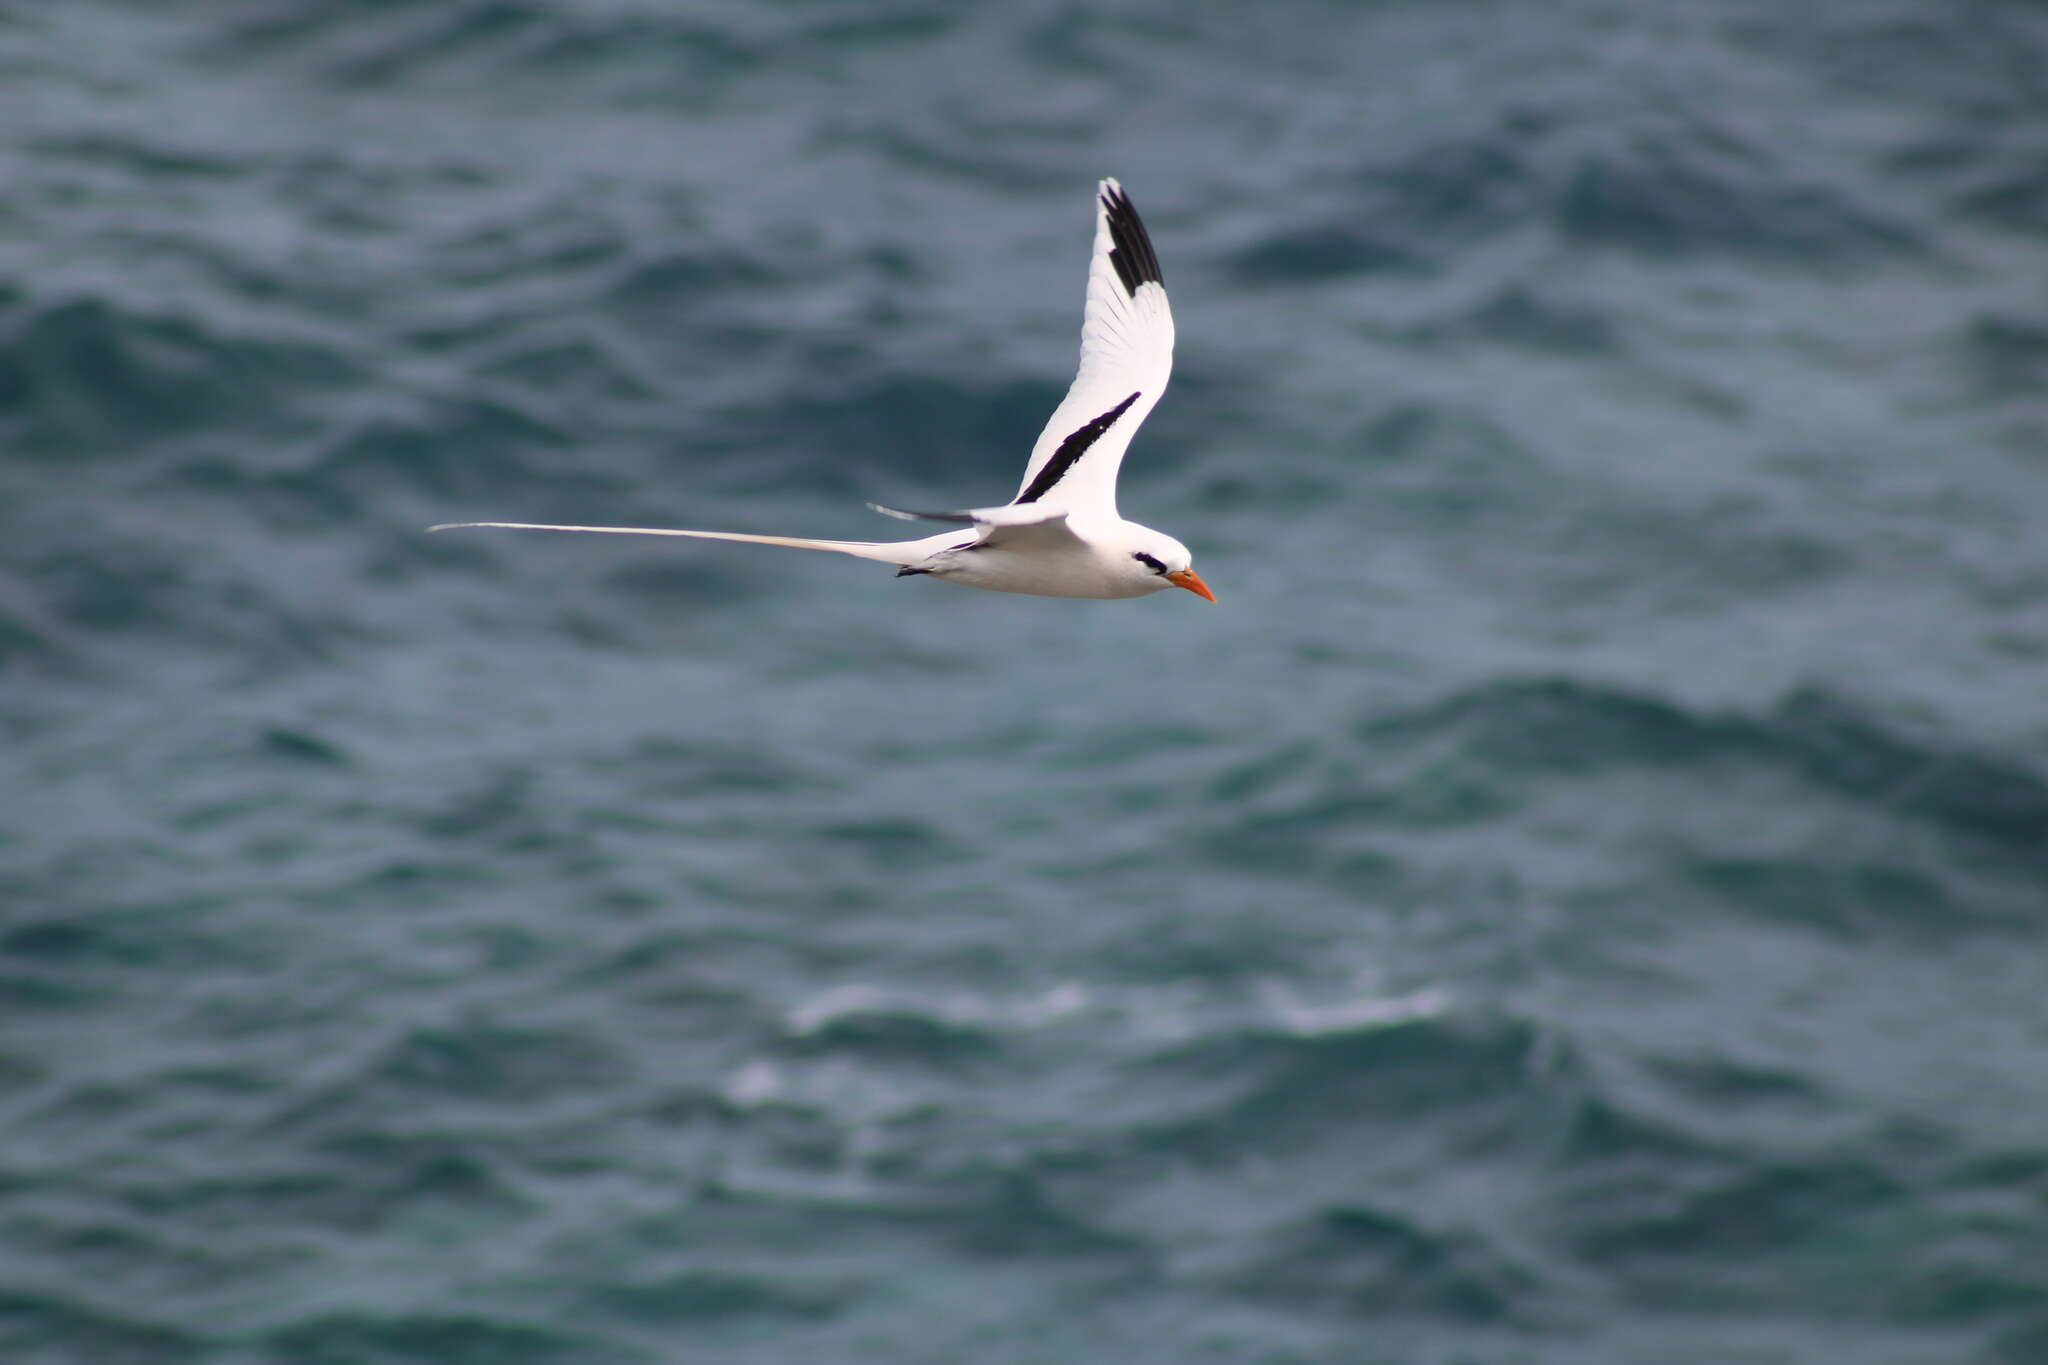 Image of longtail